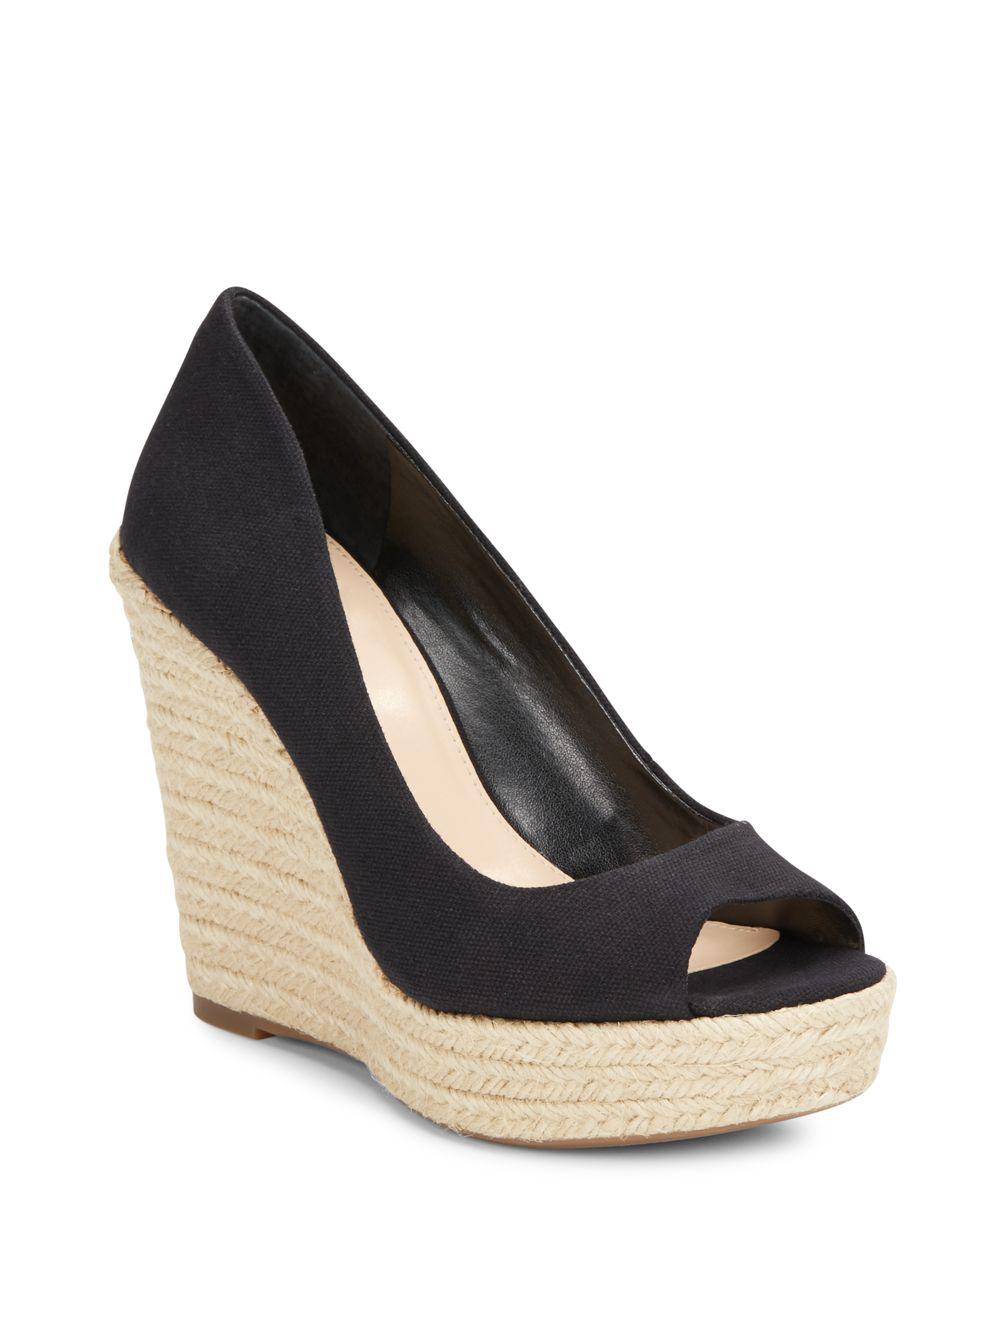 vince camuto espadrille wedge